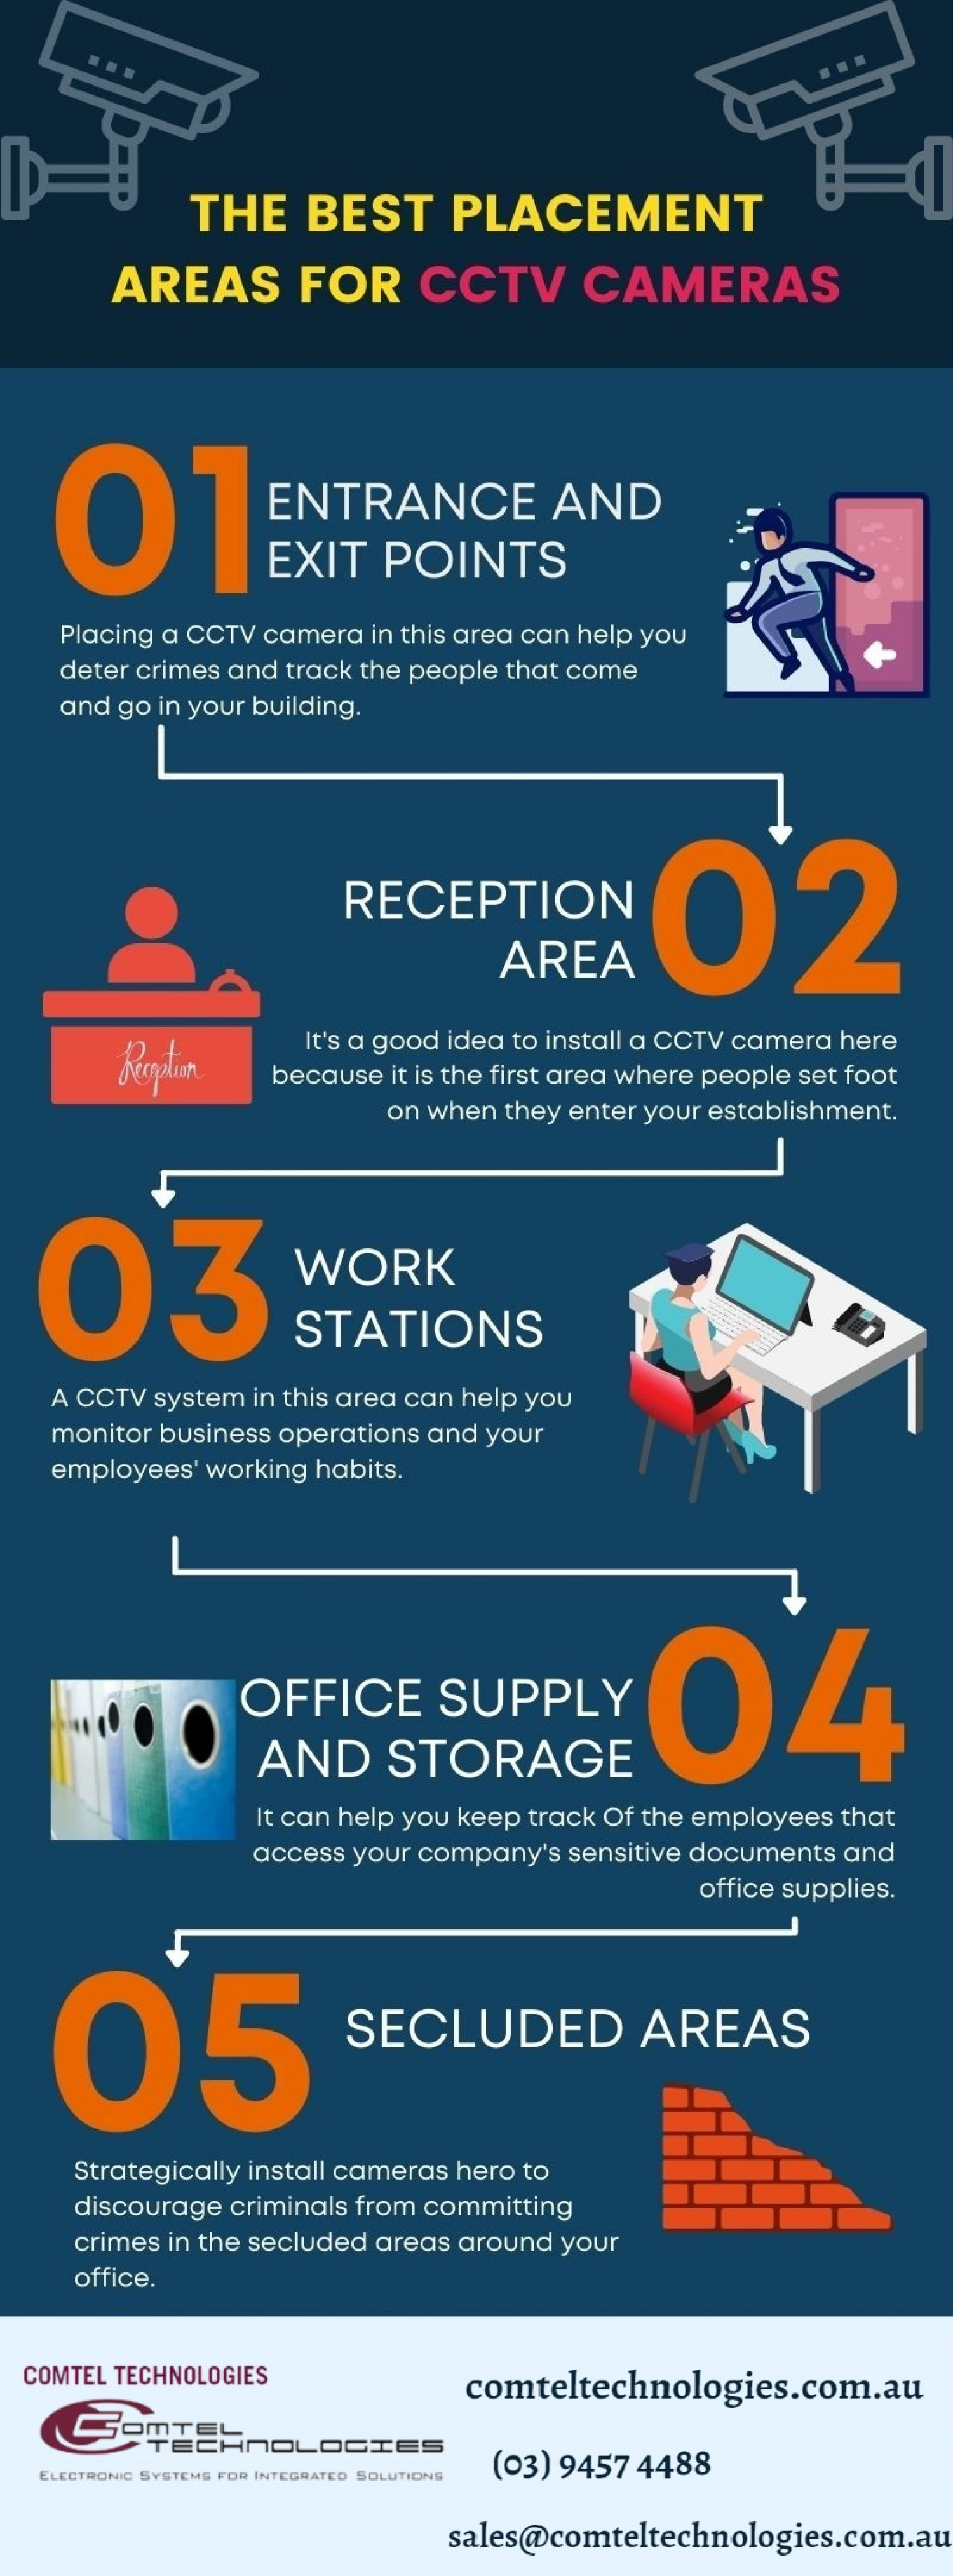 The Best Placement Areas for CCTV Cameras Infographic